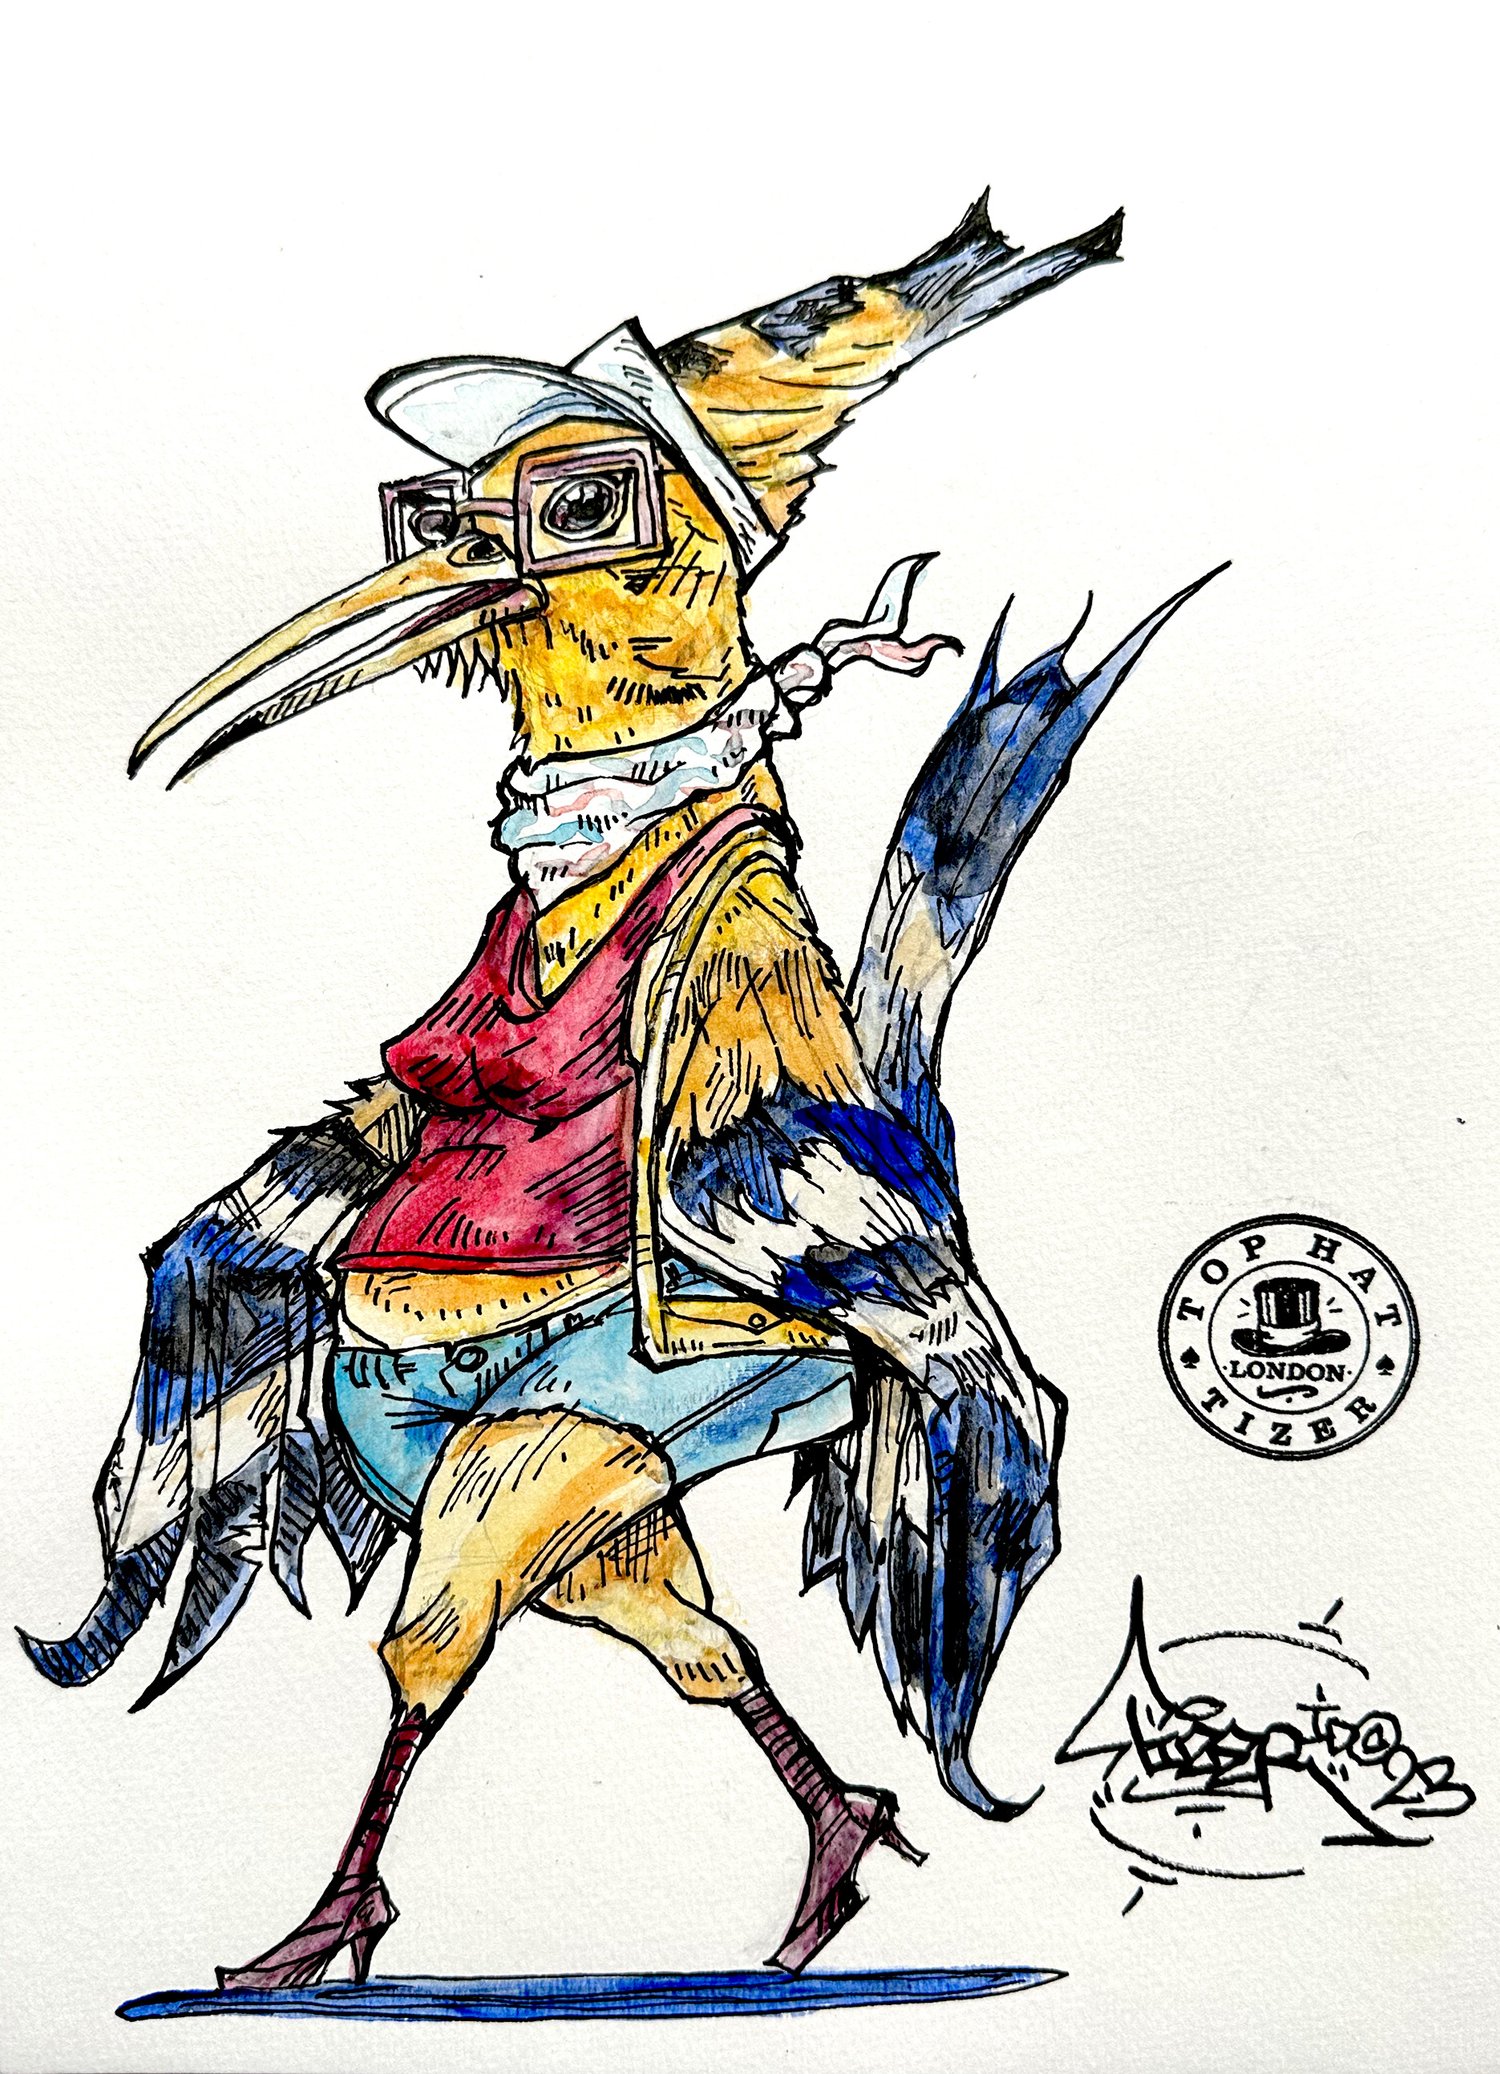 Image of 'BIRD' by TIZER